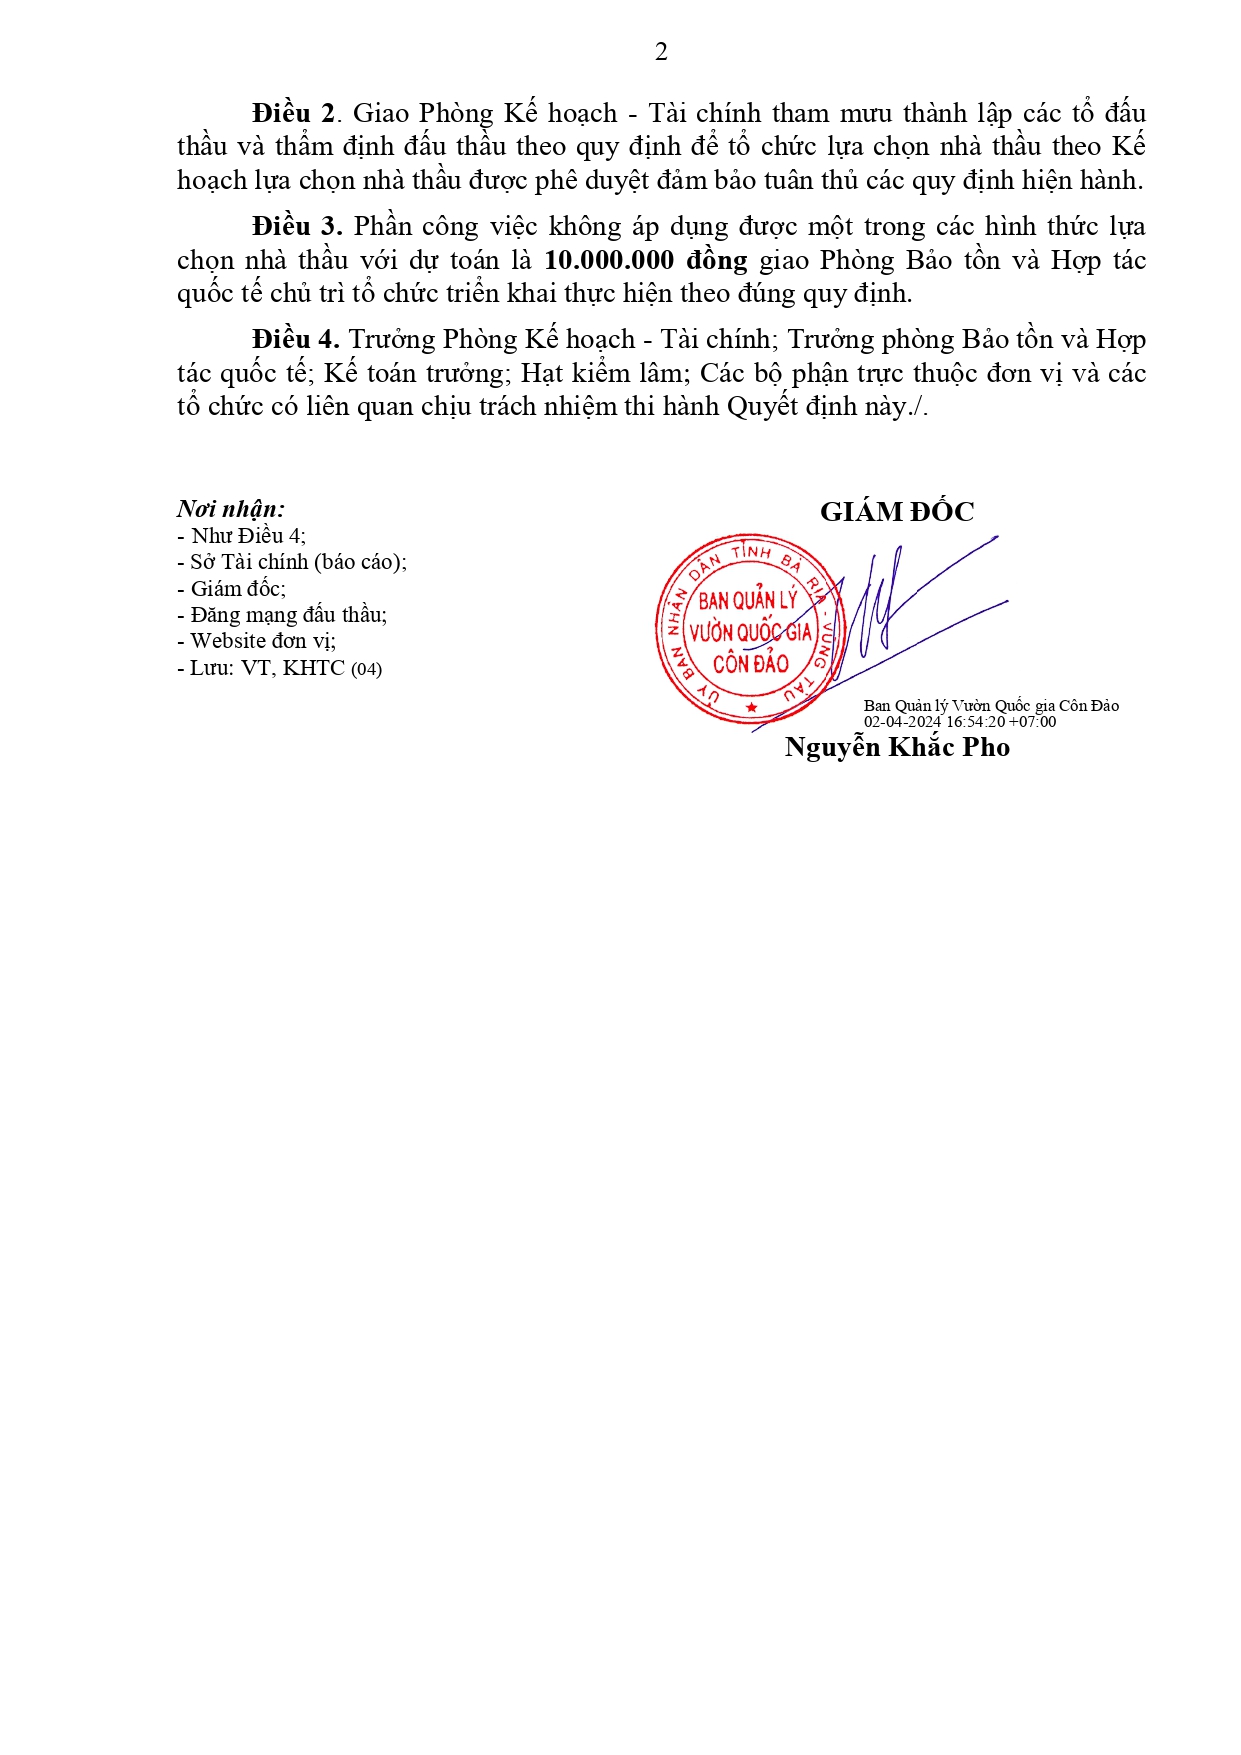 Quyet_dinh_phe_duyet_KHLCNT_1_page-0002